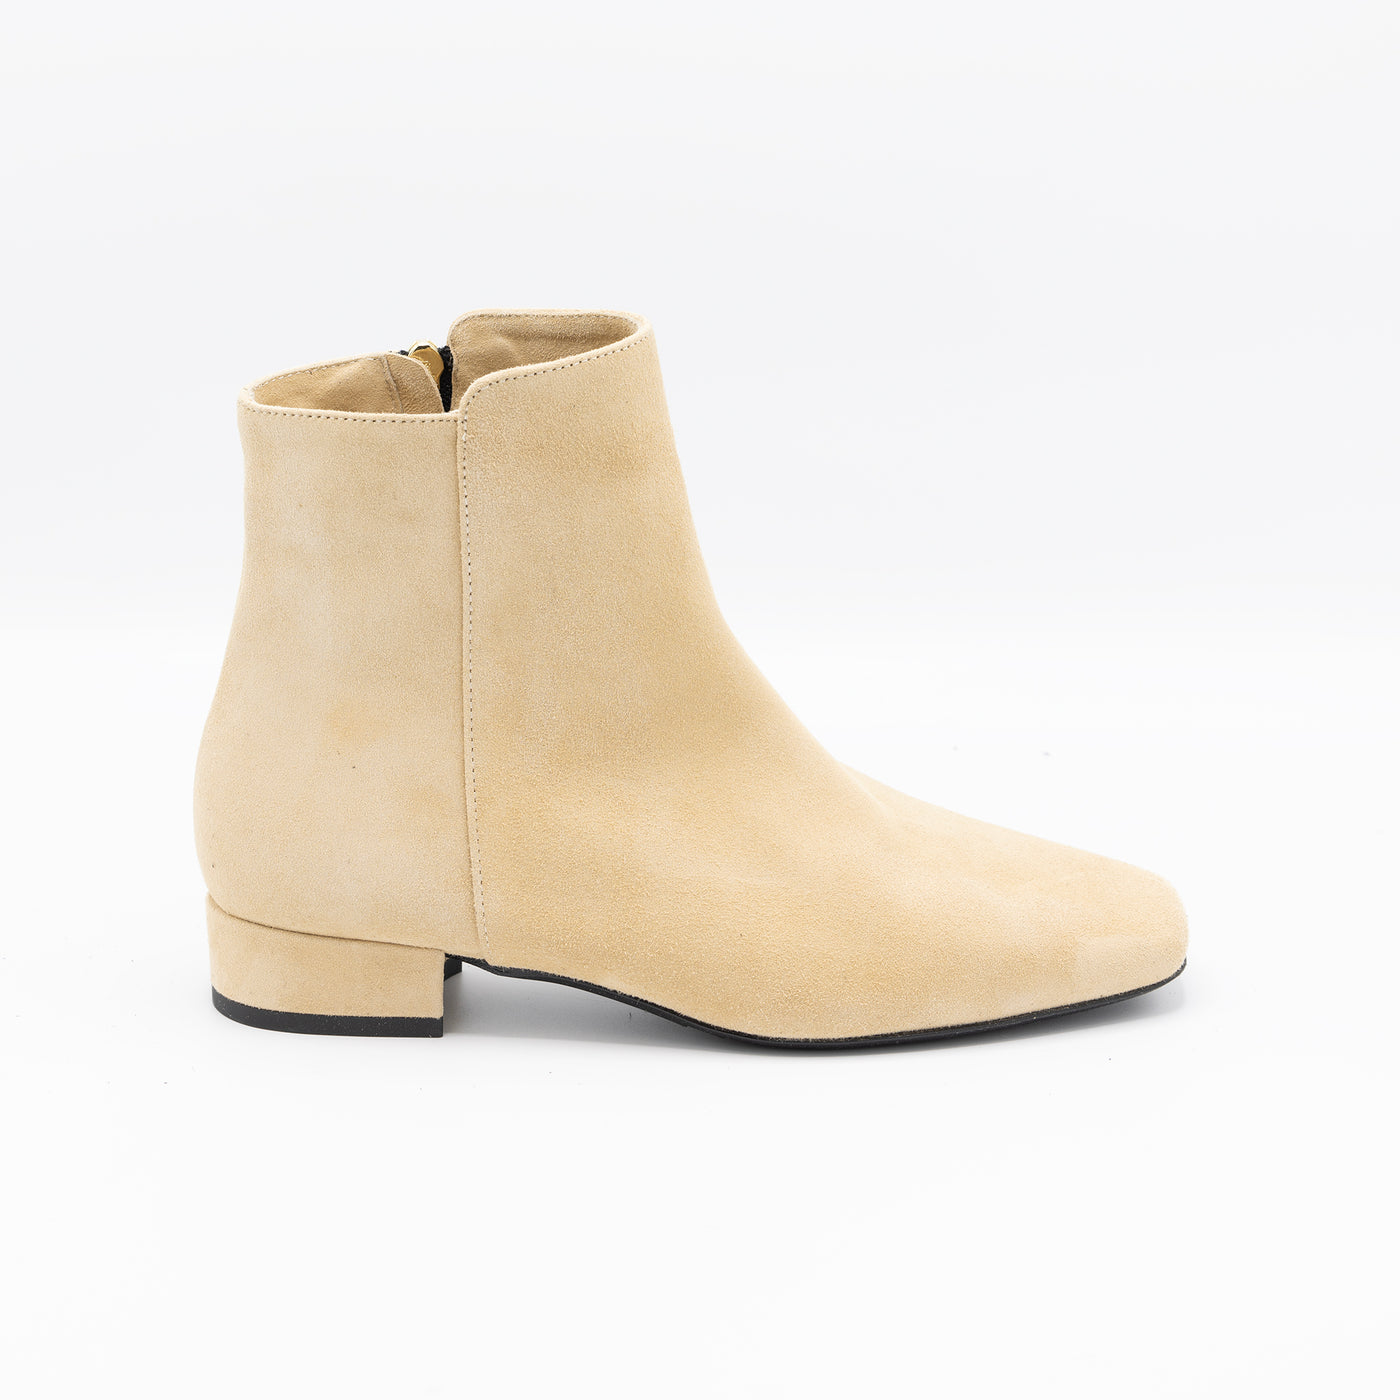 Beige suede minimalistic ankle boots with square shaped toe